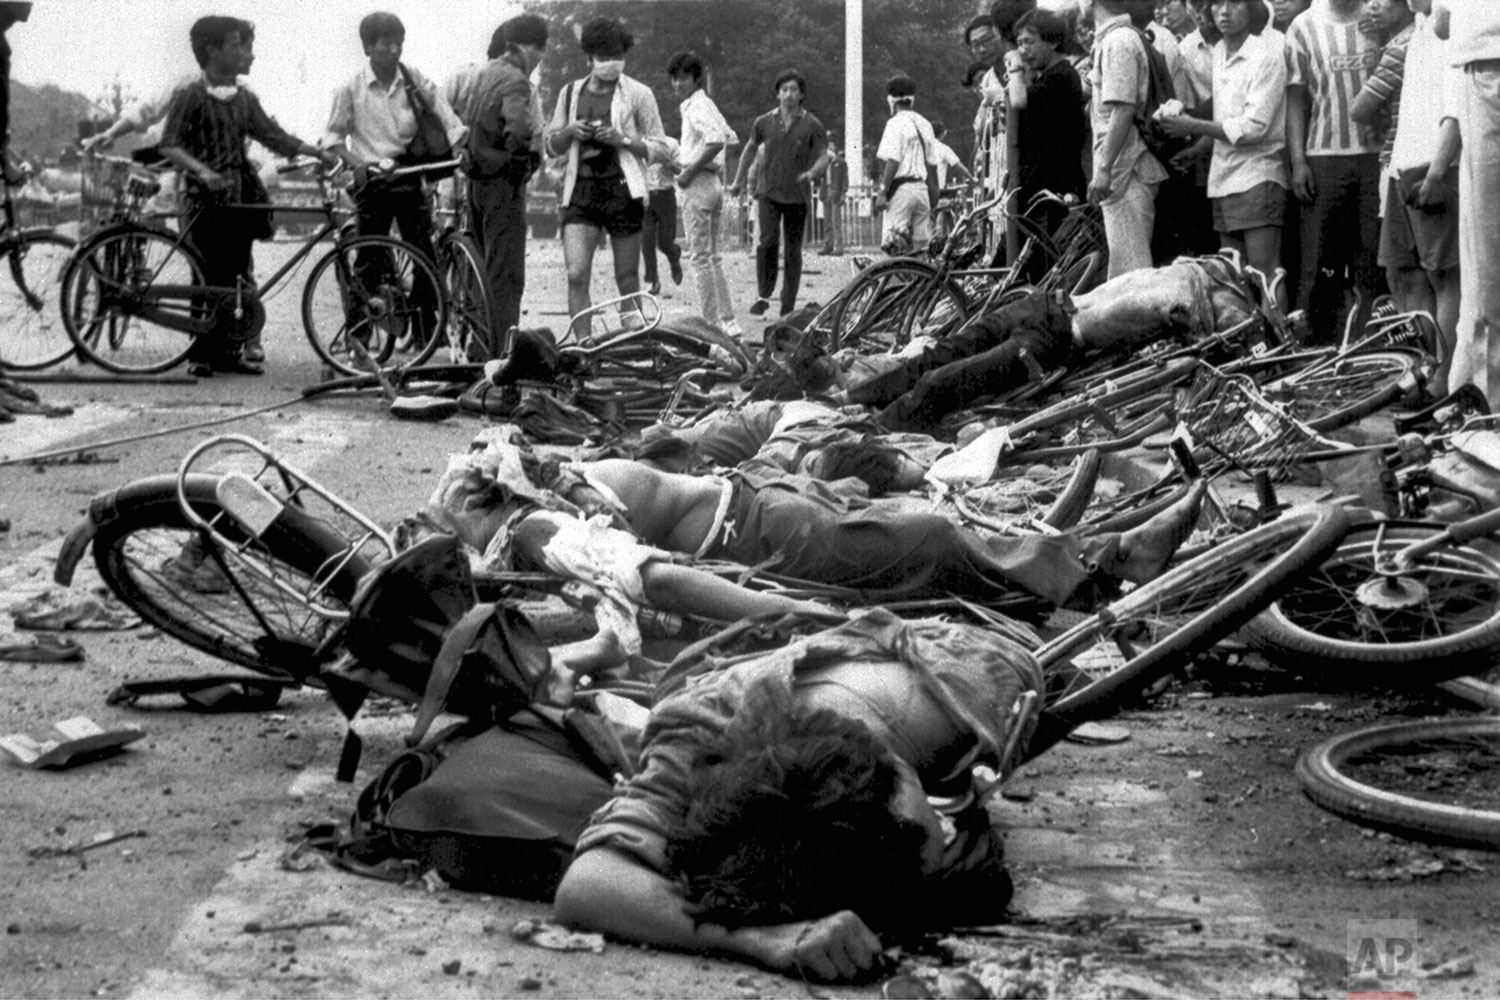  WARNING: GRAPHIC CONTENT  The bodies of dead civilians lie among mangled bicycles near Beijing's Tiananmen Square in this June 4, 1989 file photo. A leading pro-Beijing lawmaker in Hong Kong insisted that Chinese troops did not massacre people durin